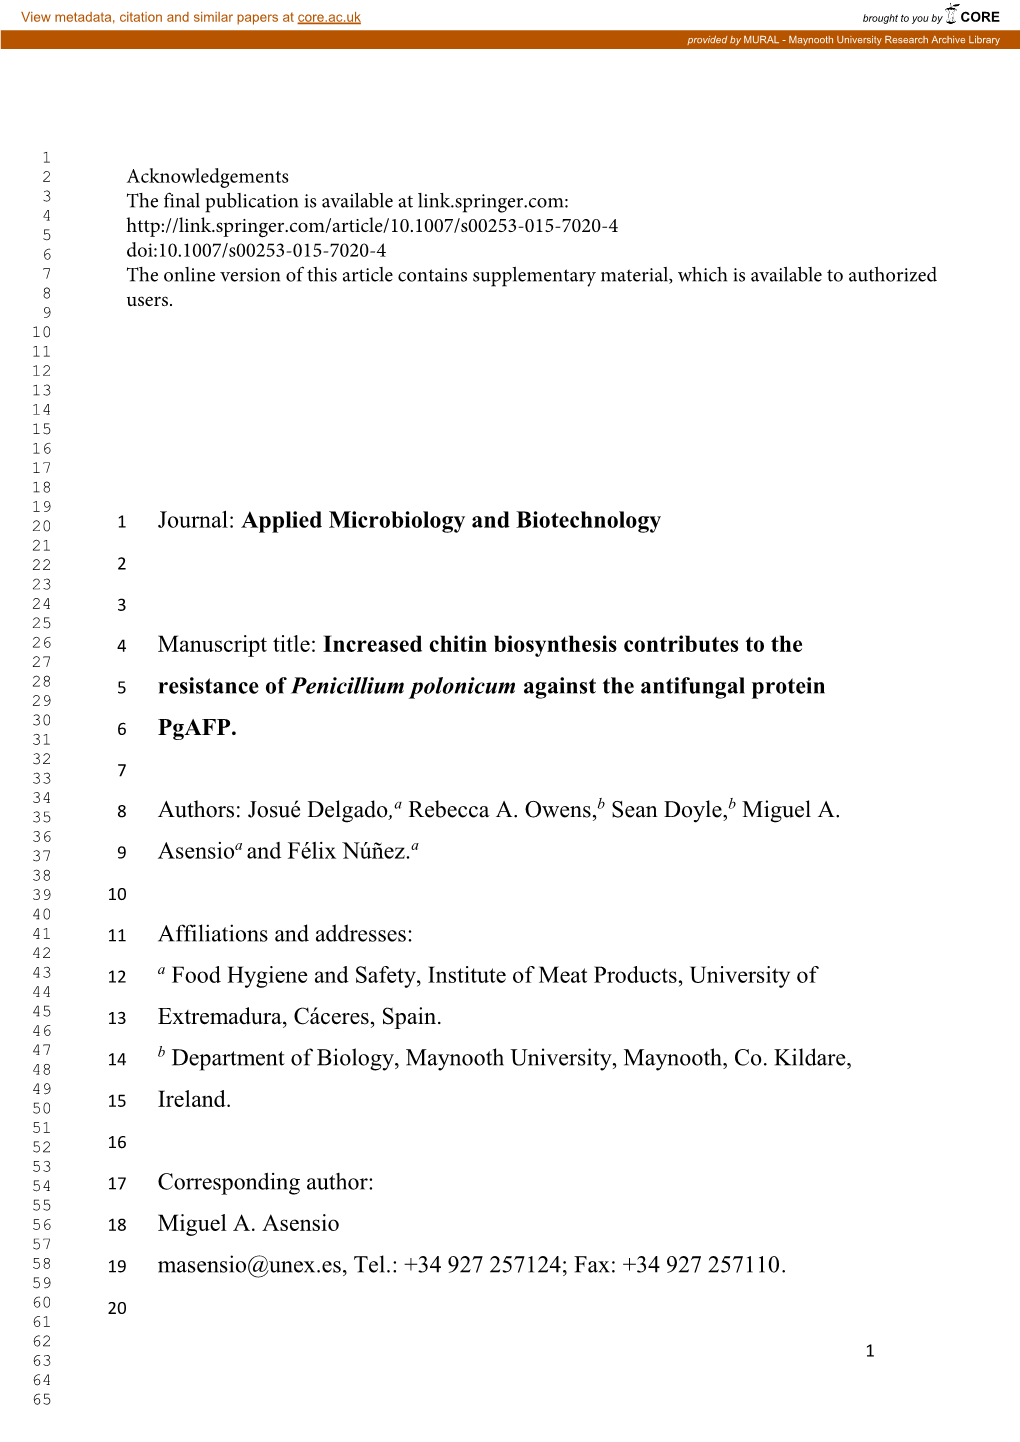 Applied Microbiology and Biotechnology Manuscript Title